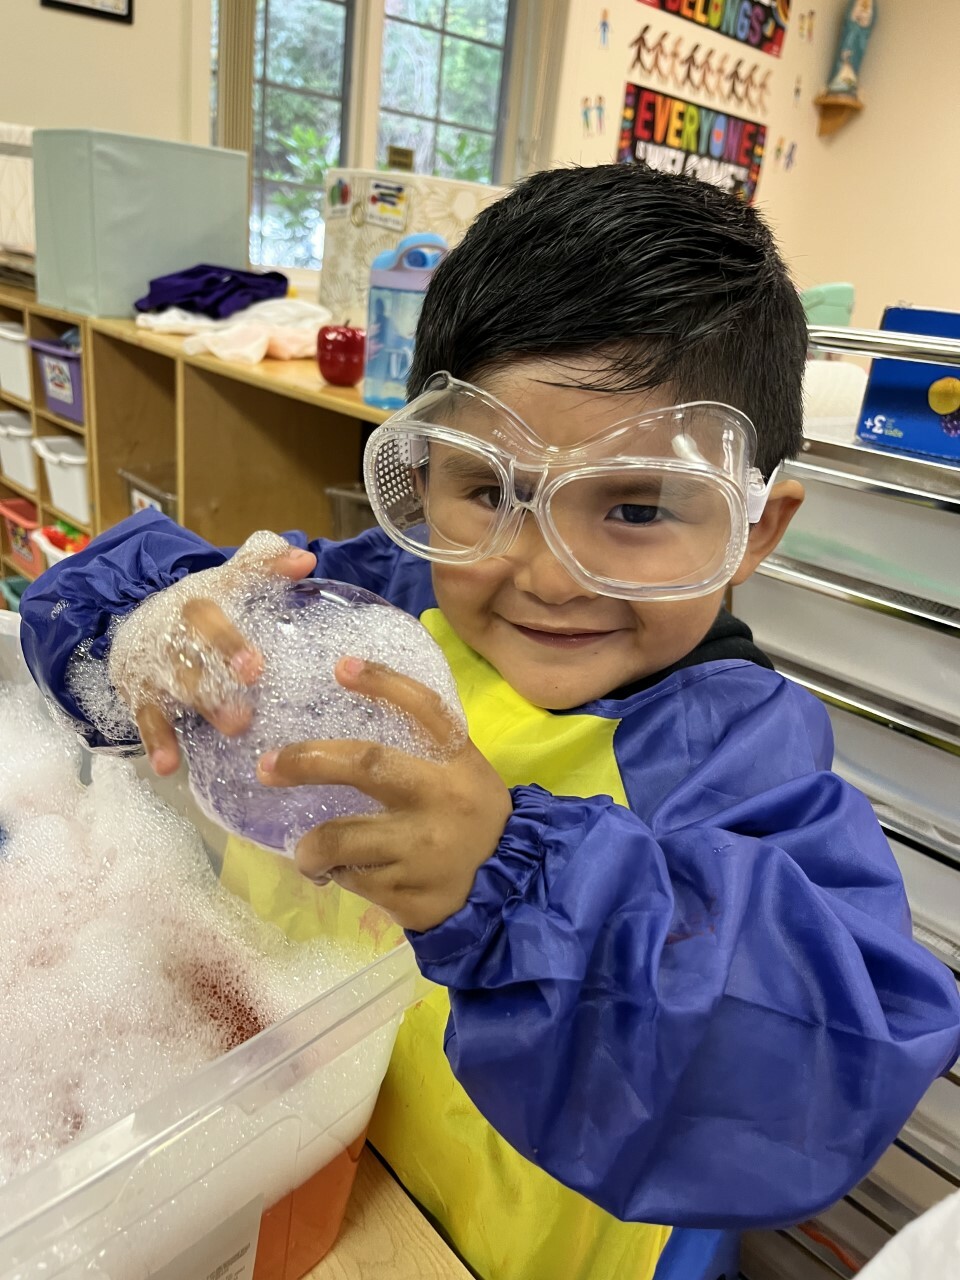 Our Lady of the Hamptons preK students are having fun learning about science. COURTESY OUR LADY OF THE HAMPTONS SCHOOL